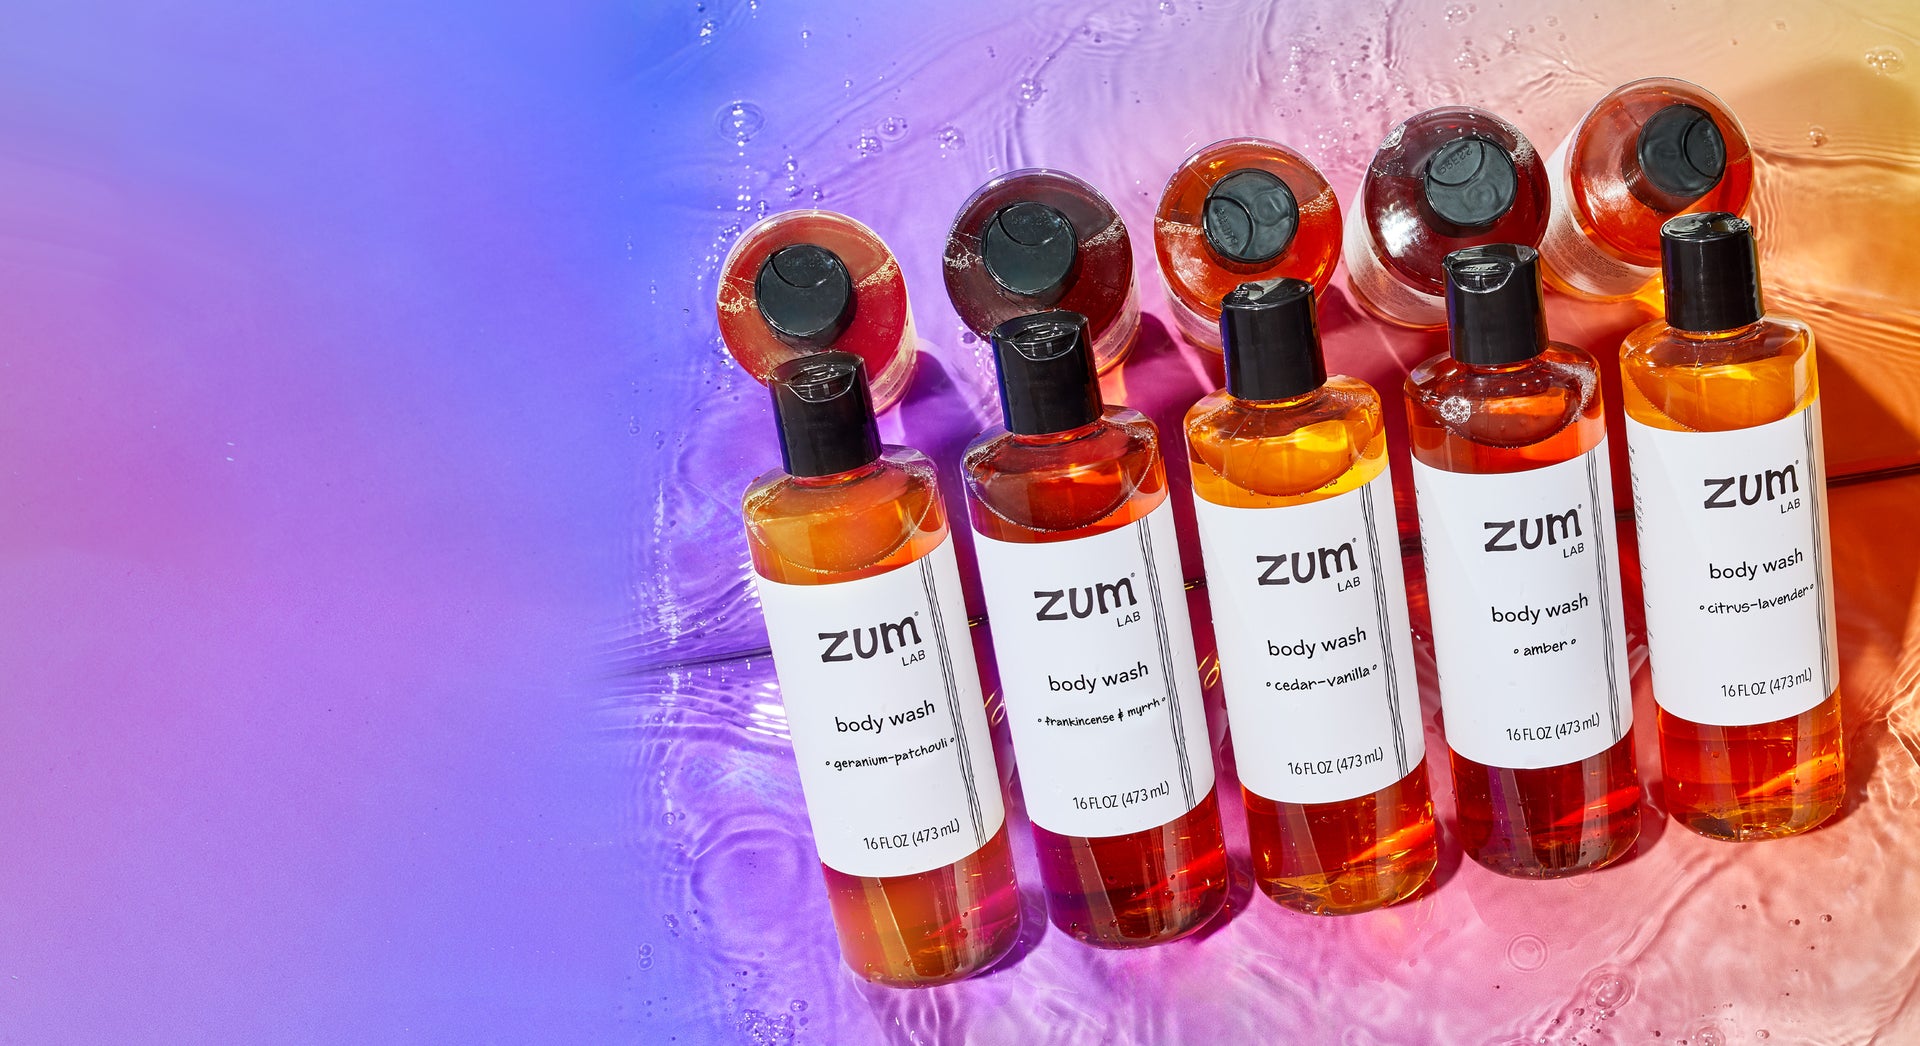 Geranium-Patchouli, Frankincense & Myrrh, Cedar-Vanilla, Amber, and Citrus-Lavender scented body wash bottles lined up against a mirror on a watery surface. Purple to orange gradient background color.